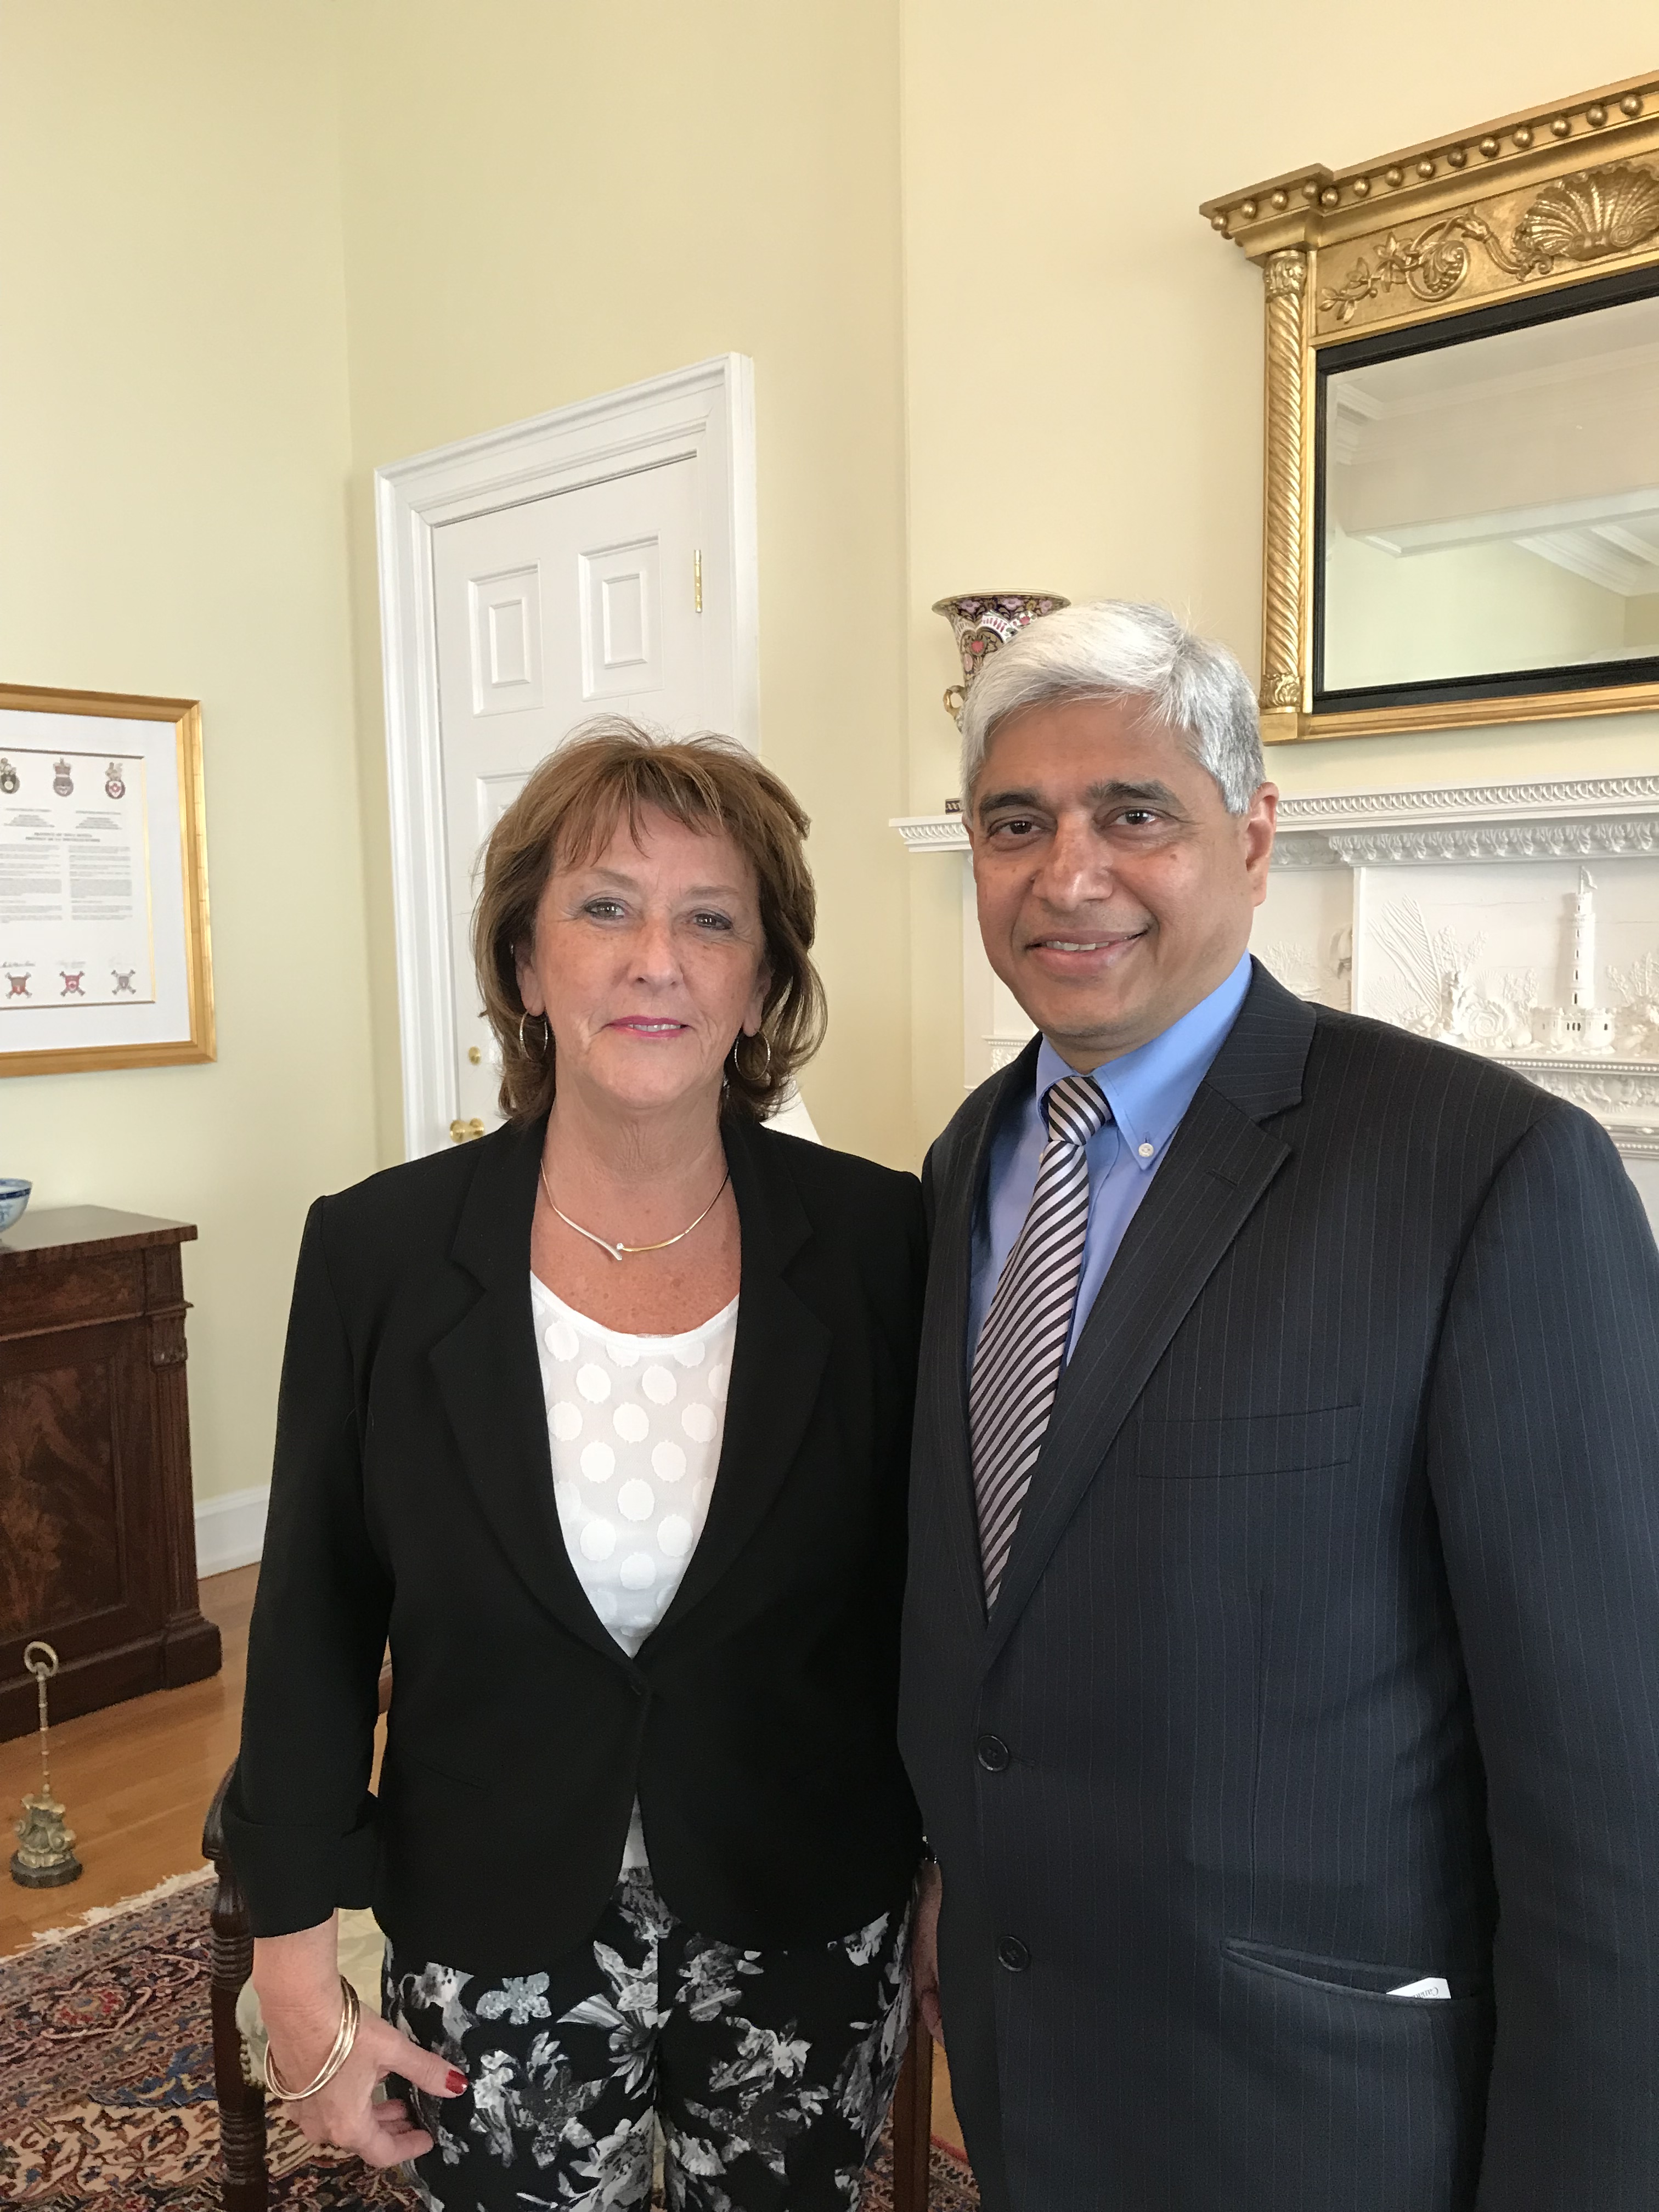 Deputy Premier Karen Casey met with His Excellency Vikas Swarup, High Commissioner of India to Canada on May 24, 2018.